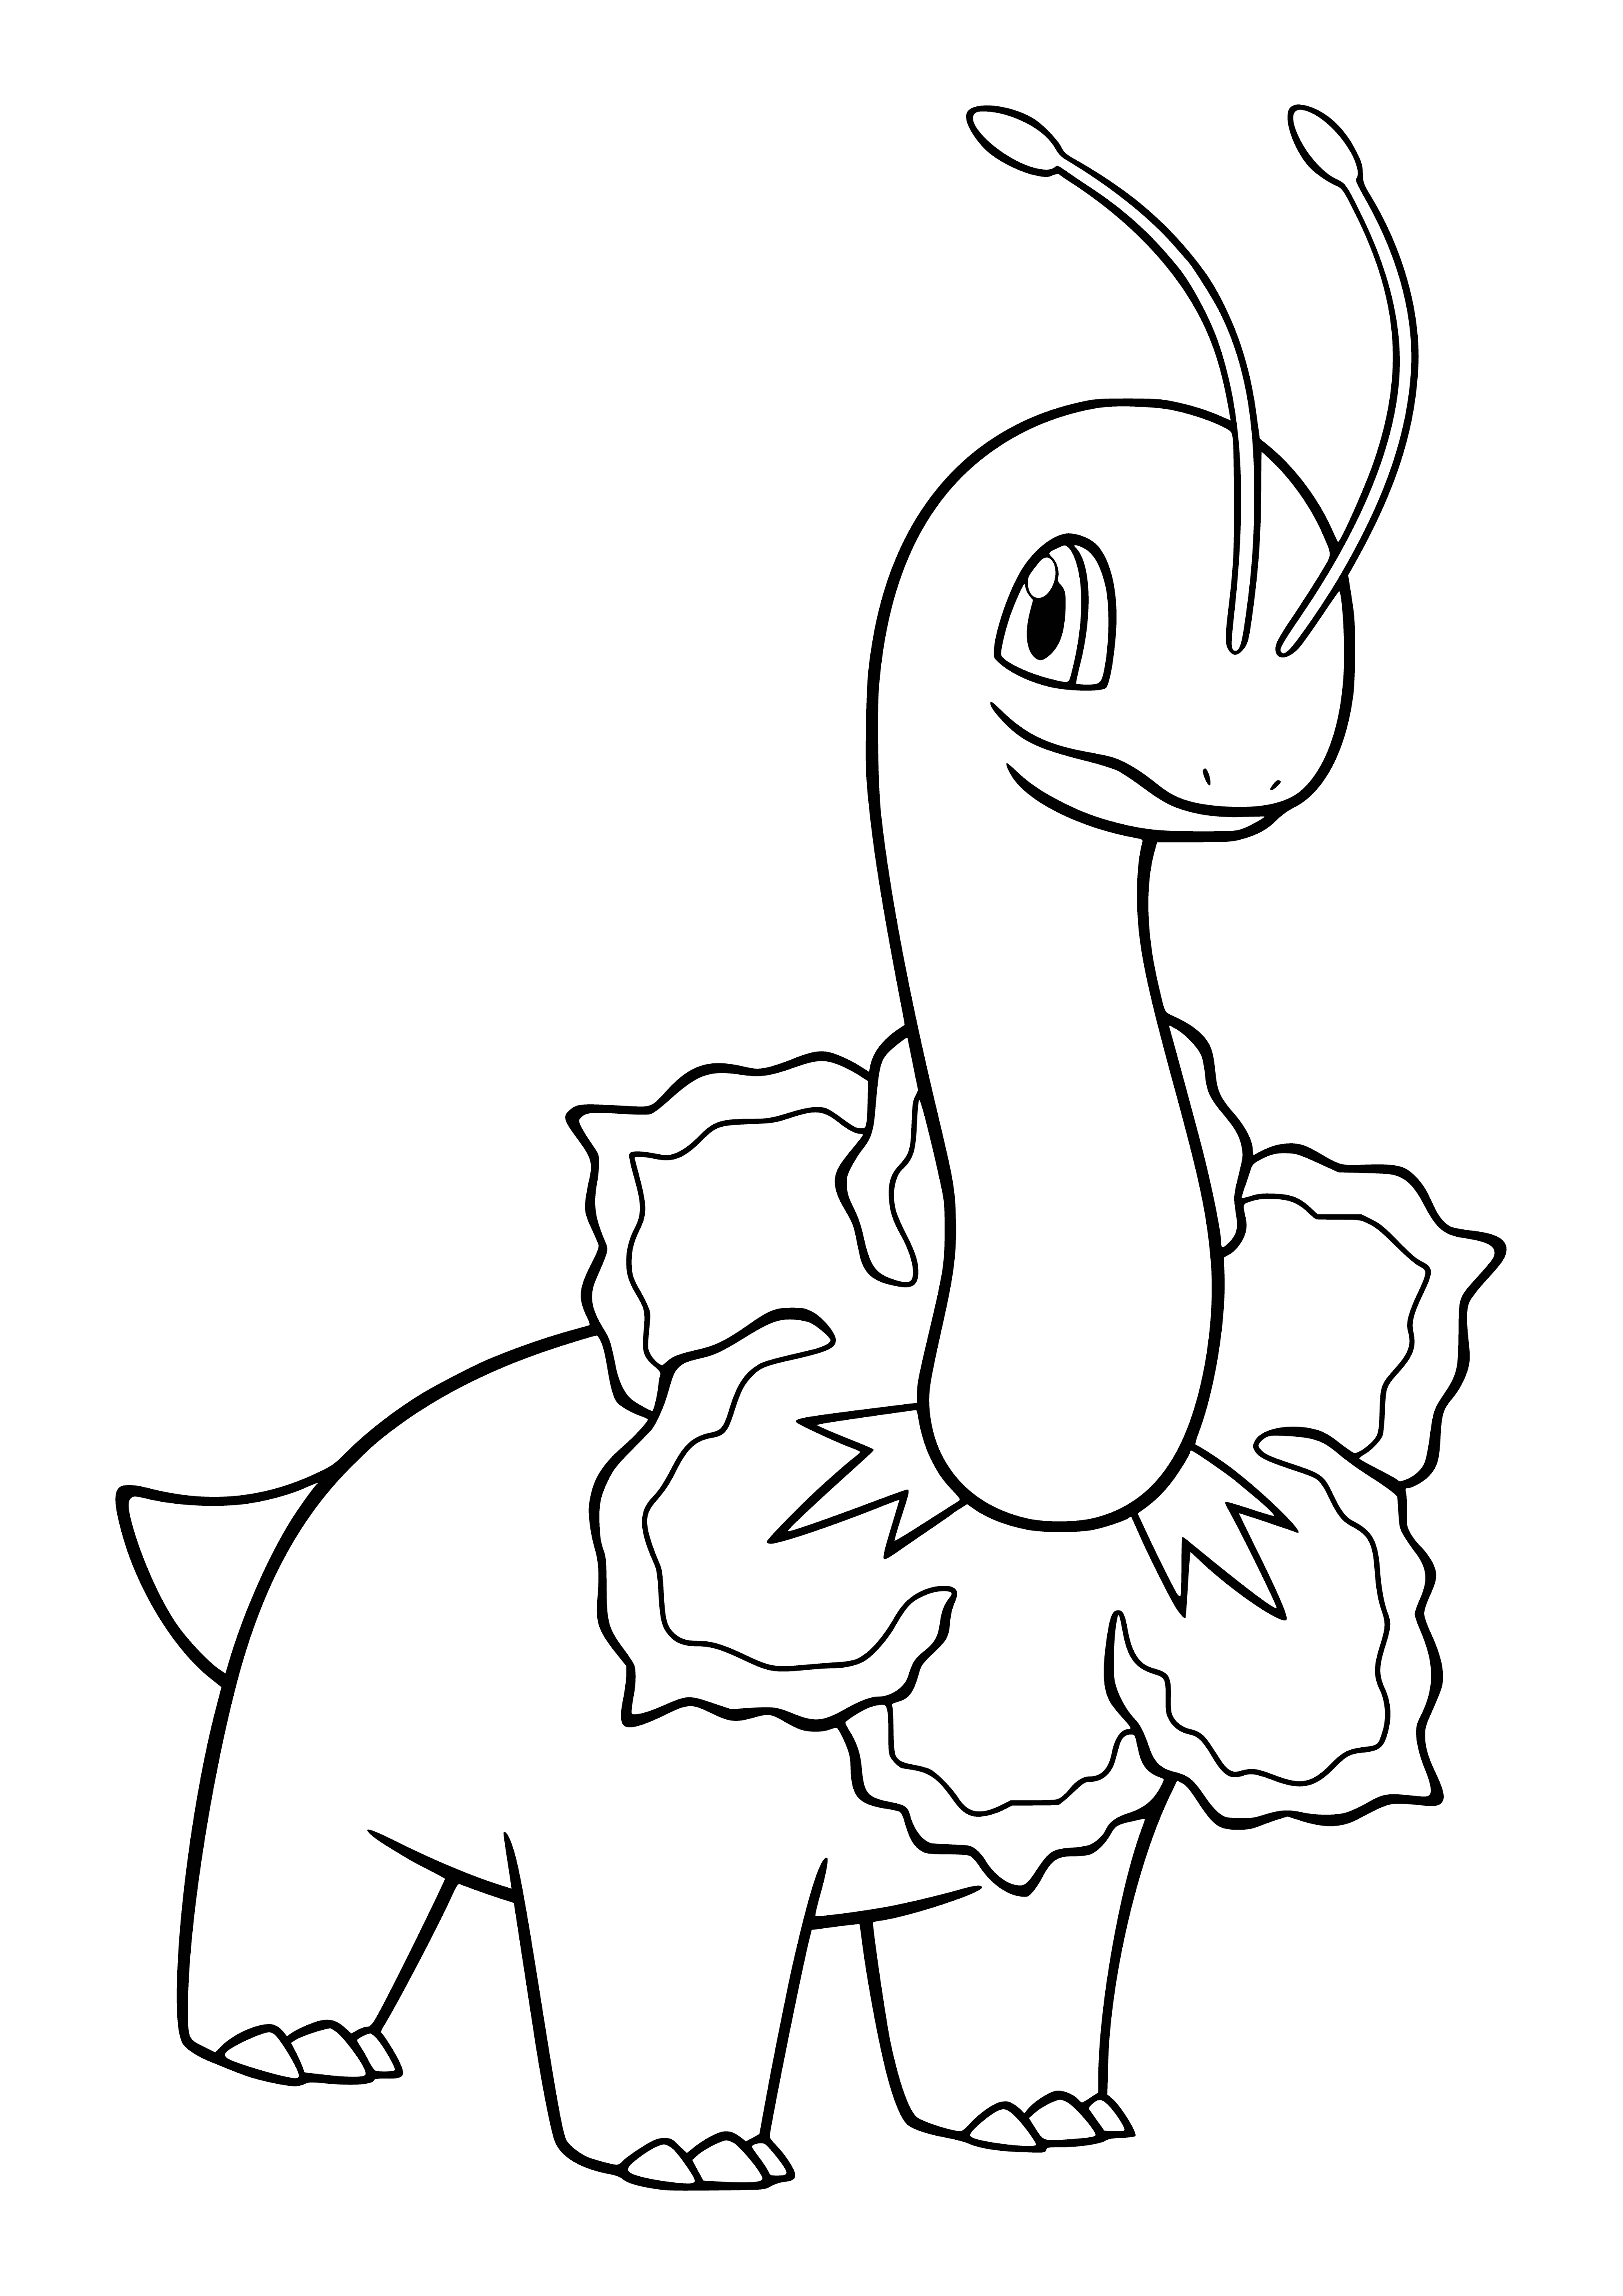 coloring page: Meganium is a big, green dinosaur-like Pokemon with a white belly, pink flower on its back, long neck & tail, & big blue eyes.